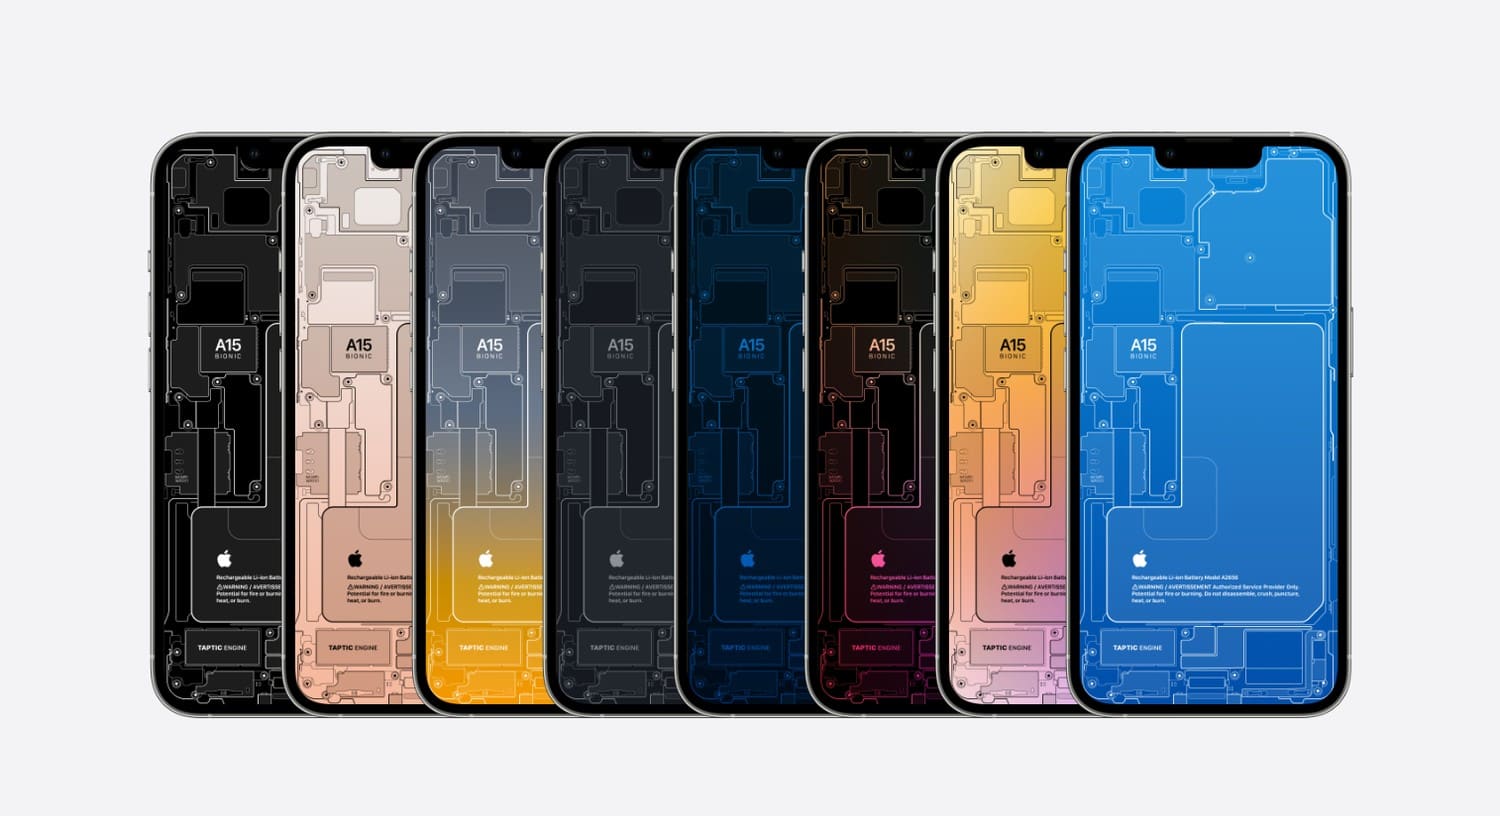 See inside your iPhone with these wallpapers